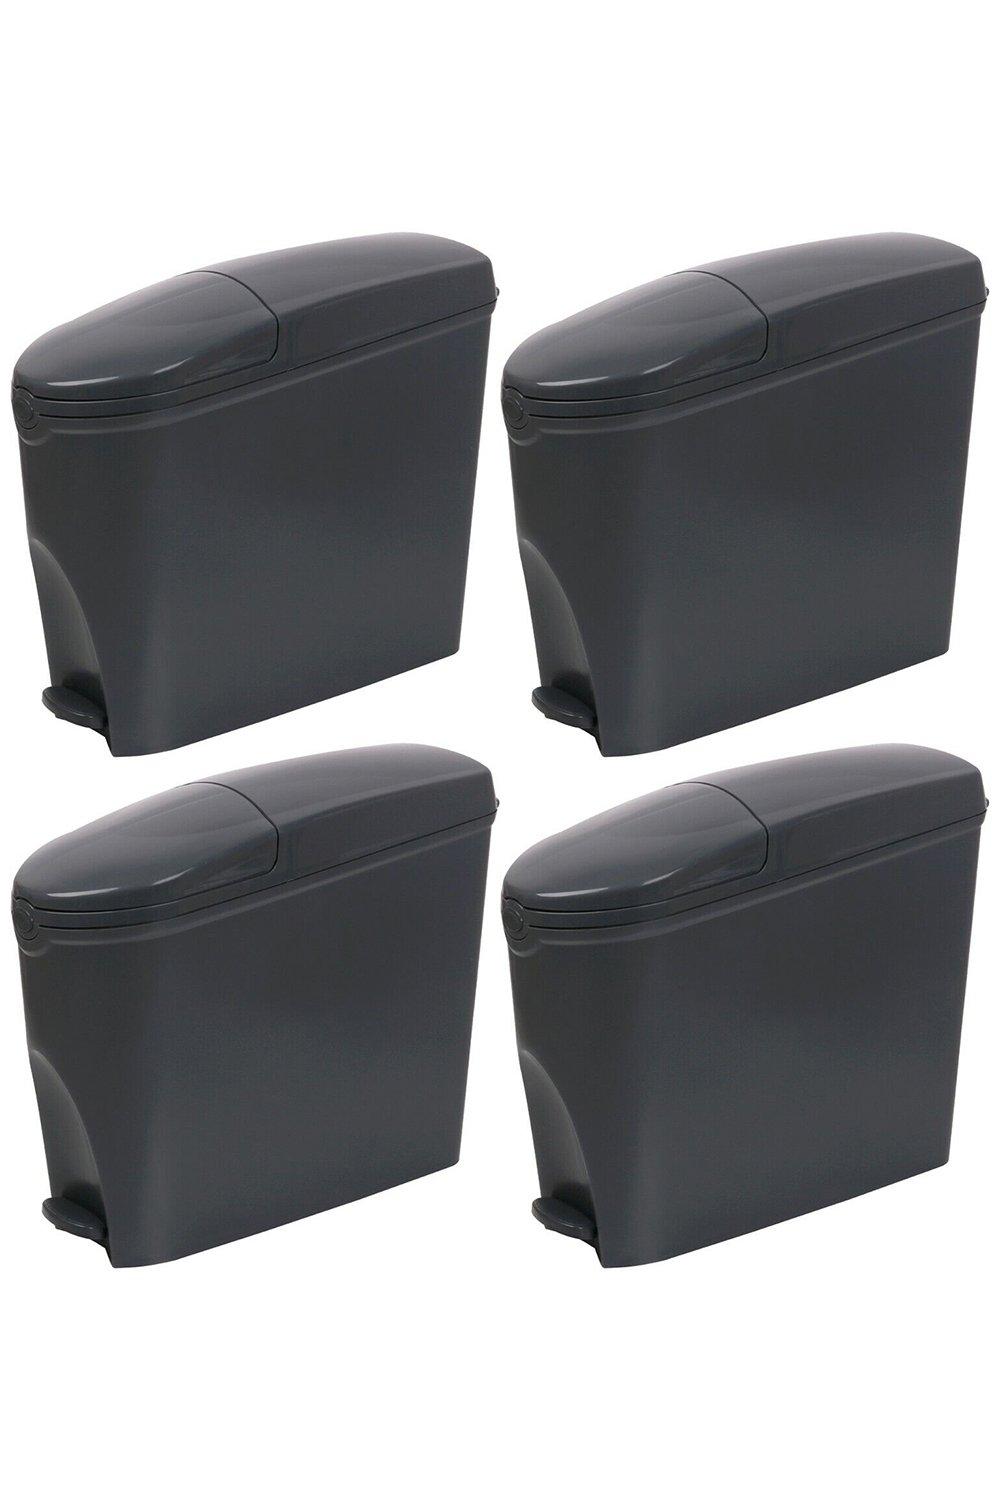 Grey Pedal Operated Toilet Sanitary Bin 4 x 20 Litre Capacity